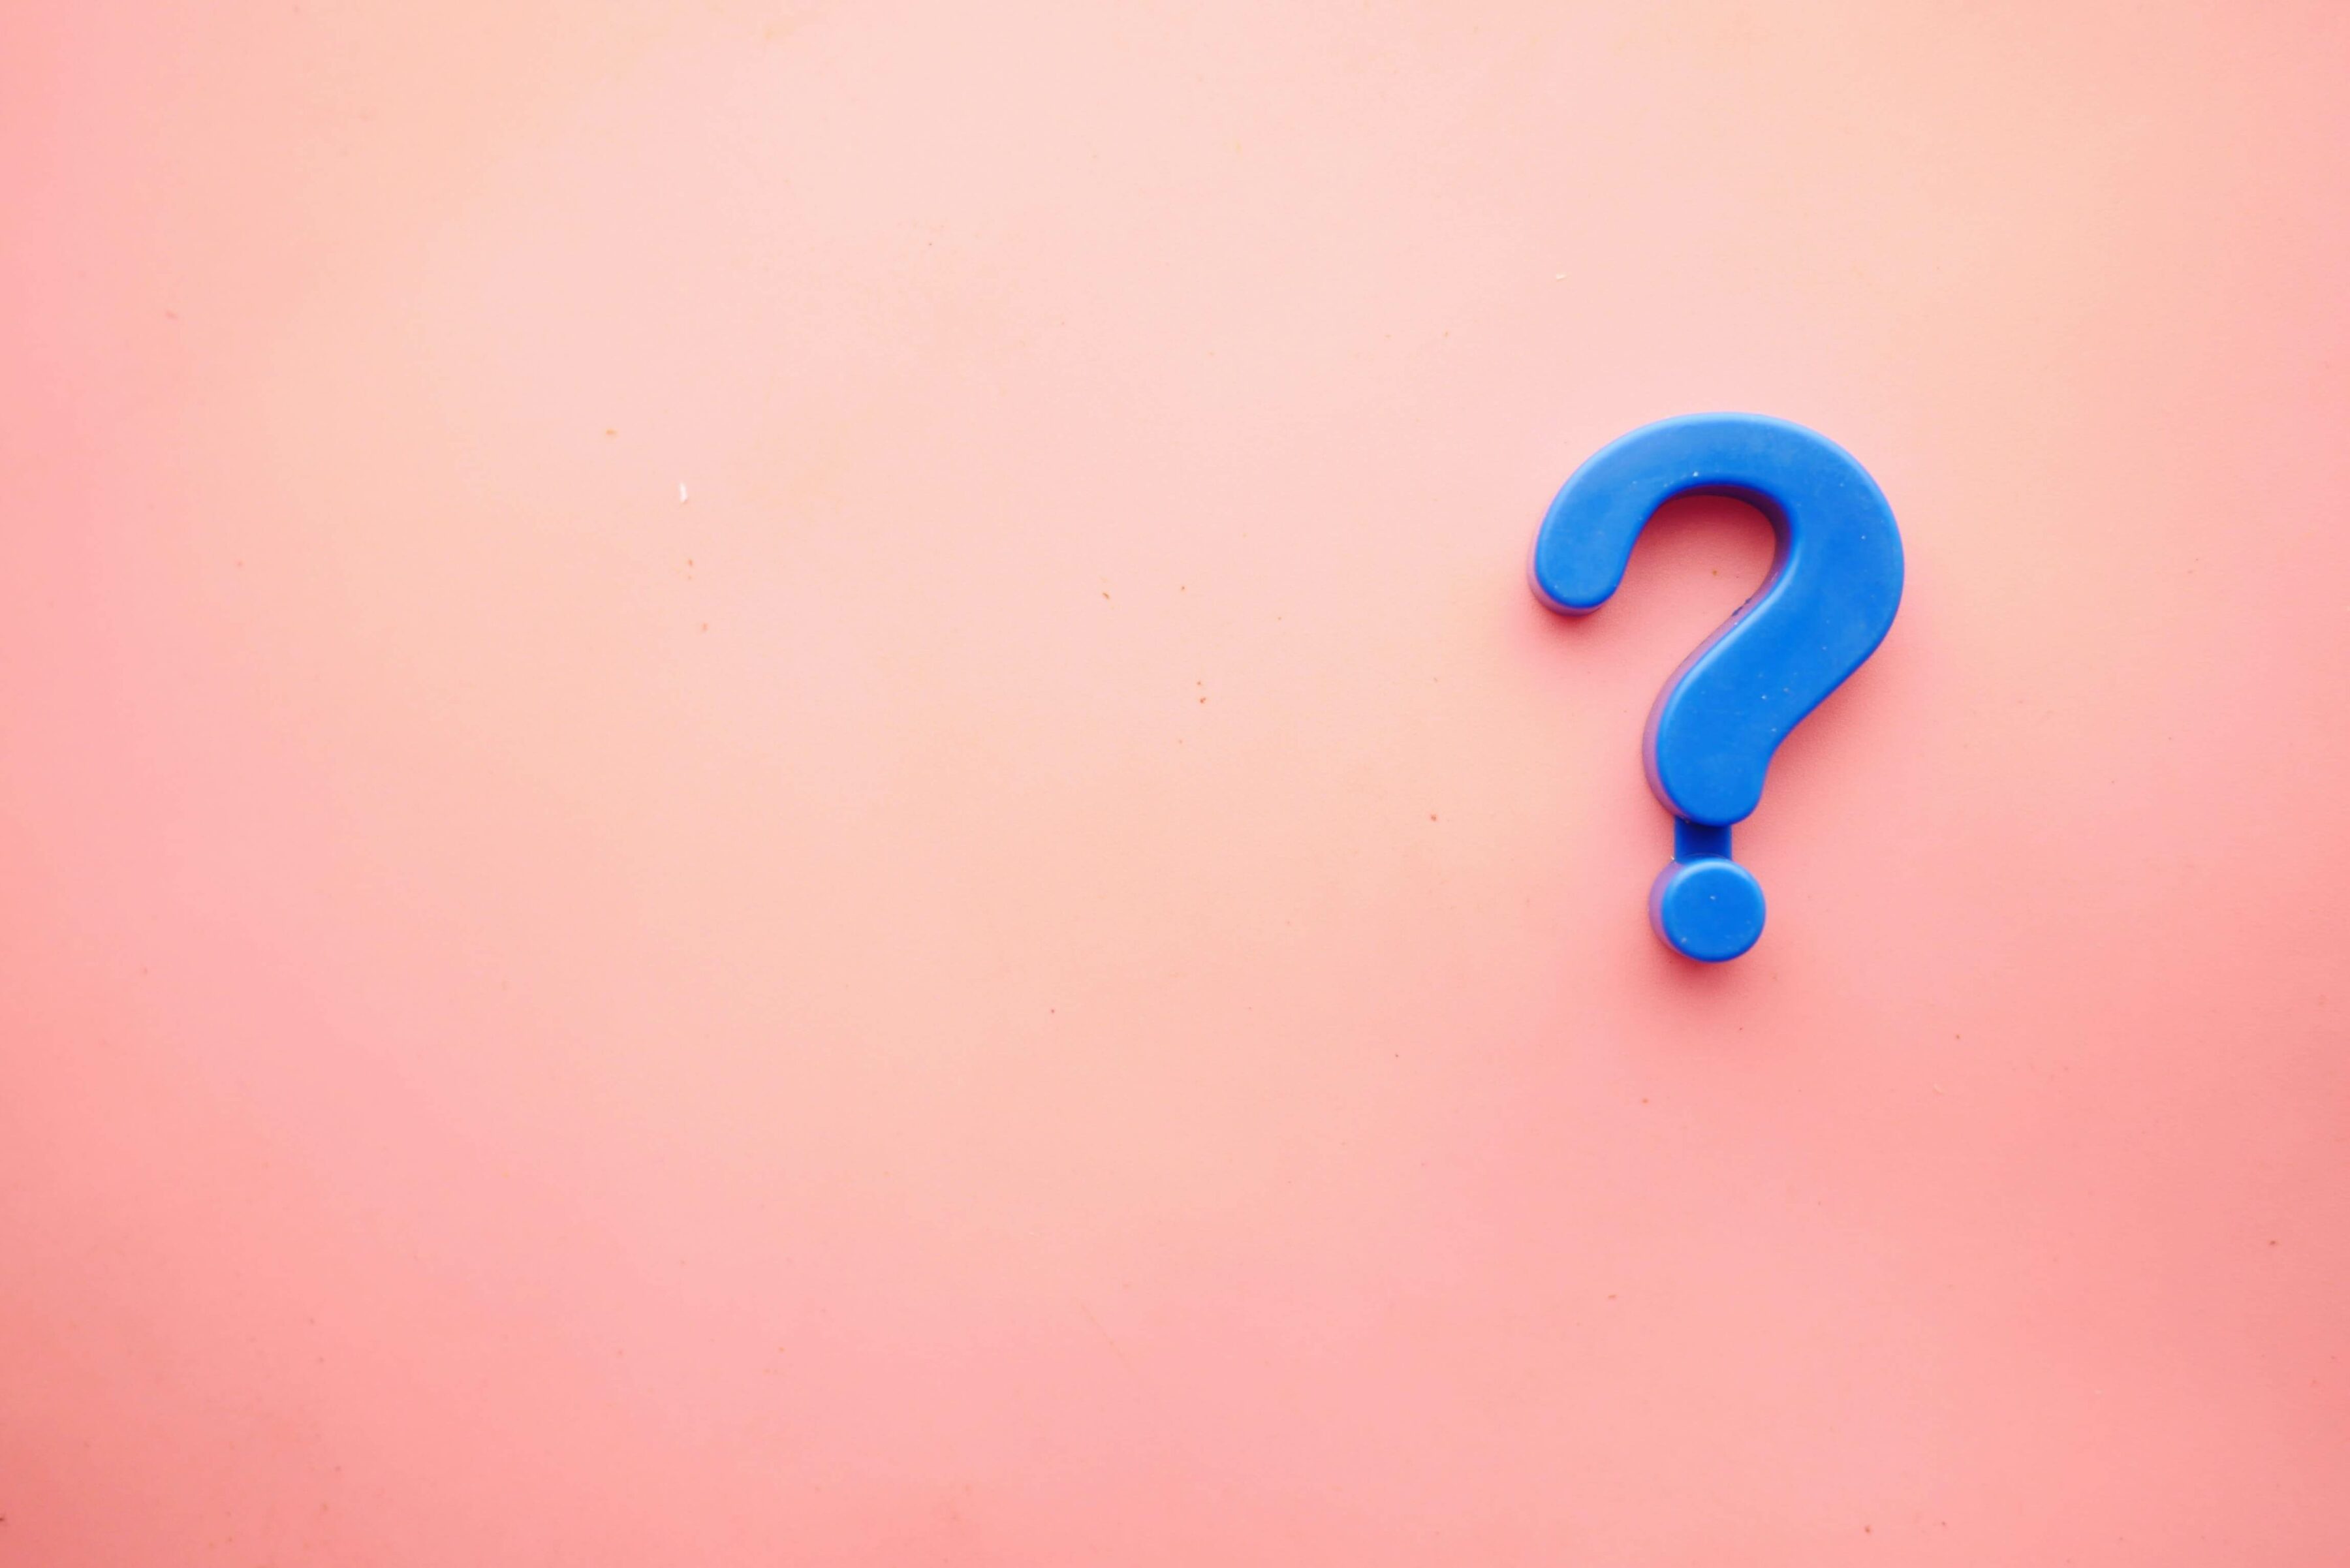 7 Good Questions to Ask Recruiters